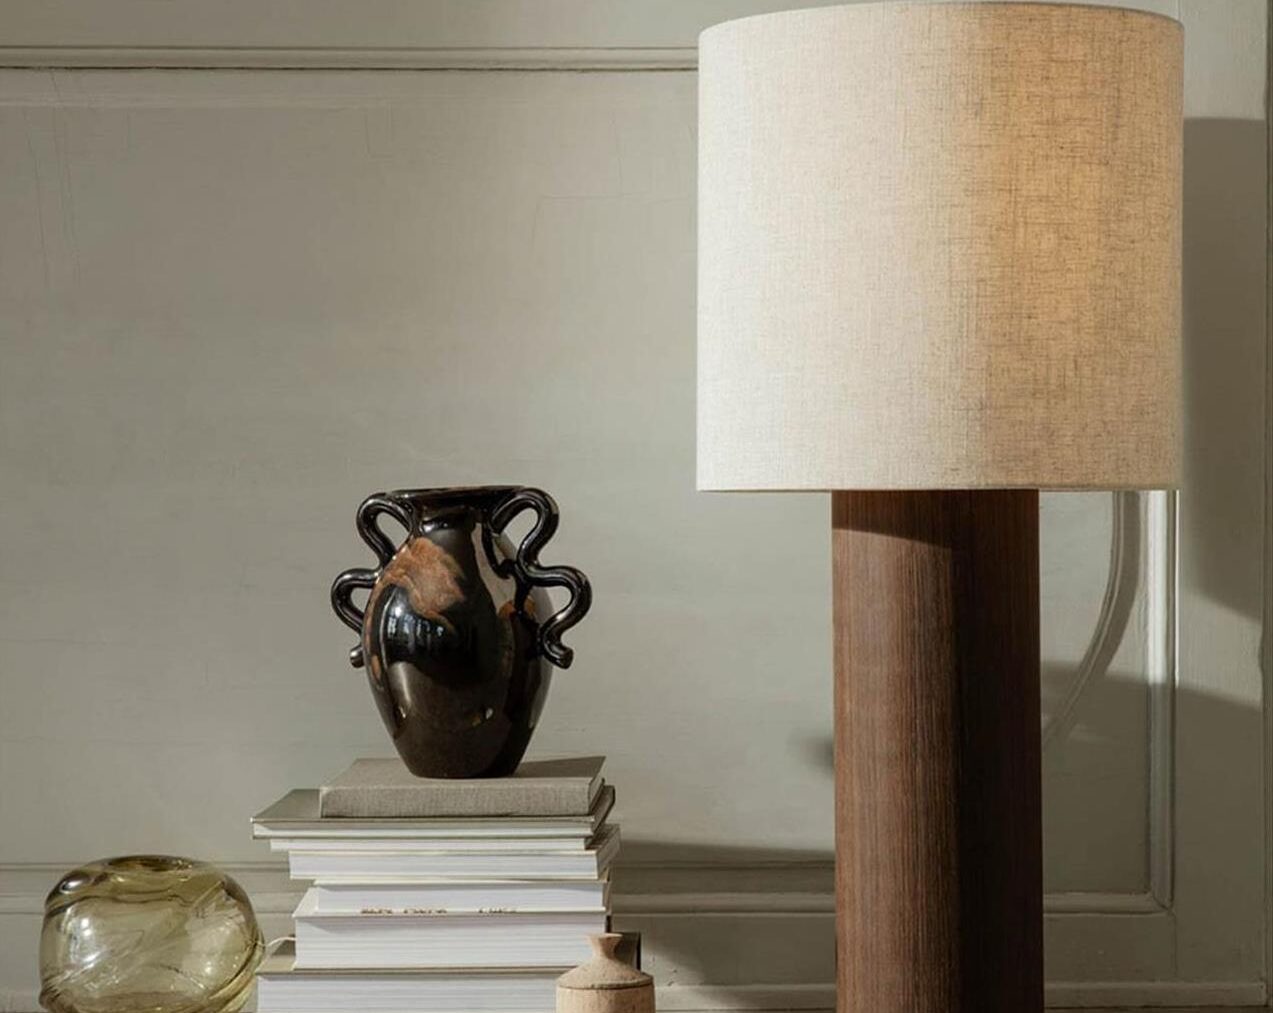 Post-Floor-Lamp-Base-and-Eclipse-Lampshade-Large